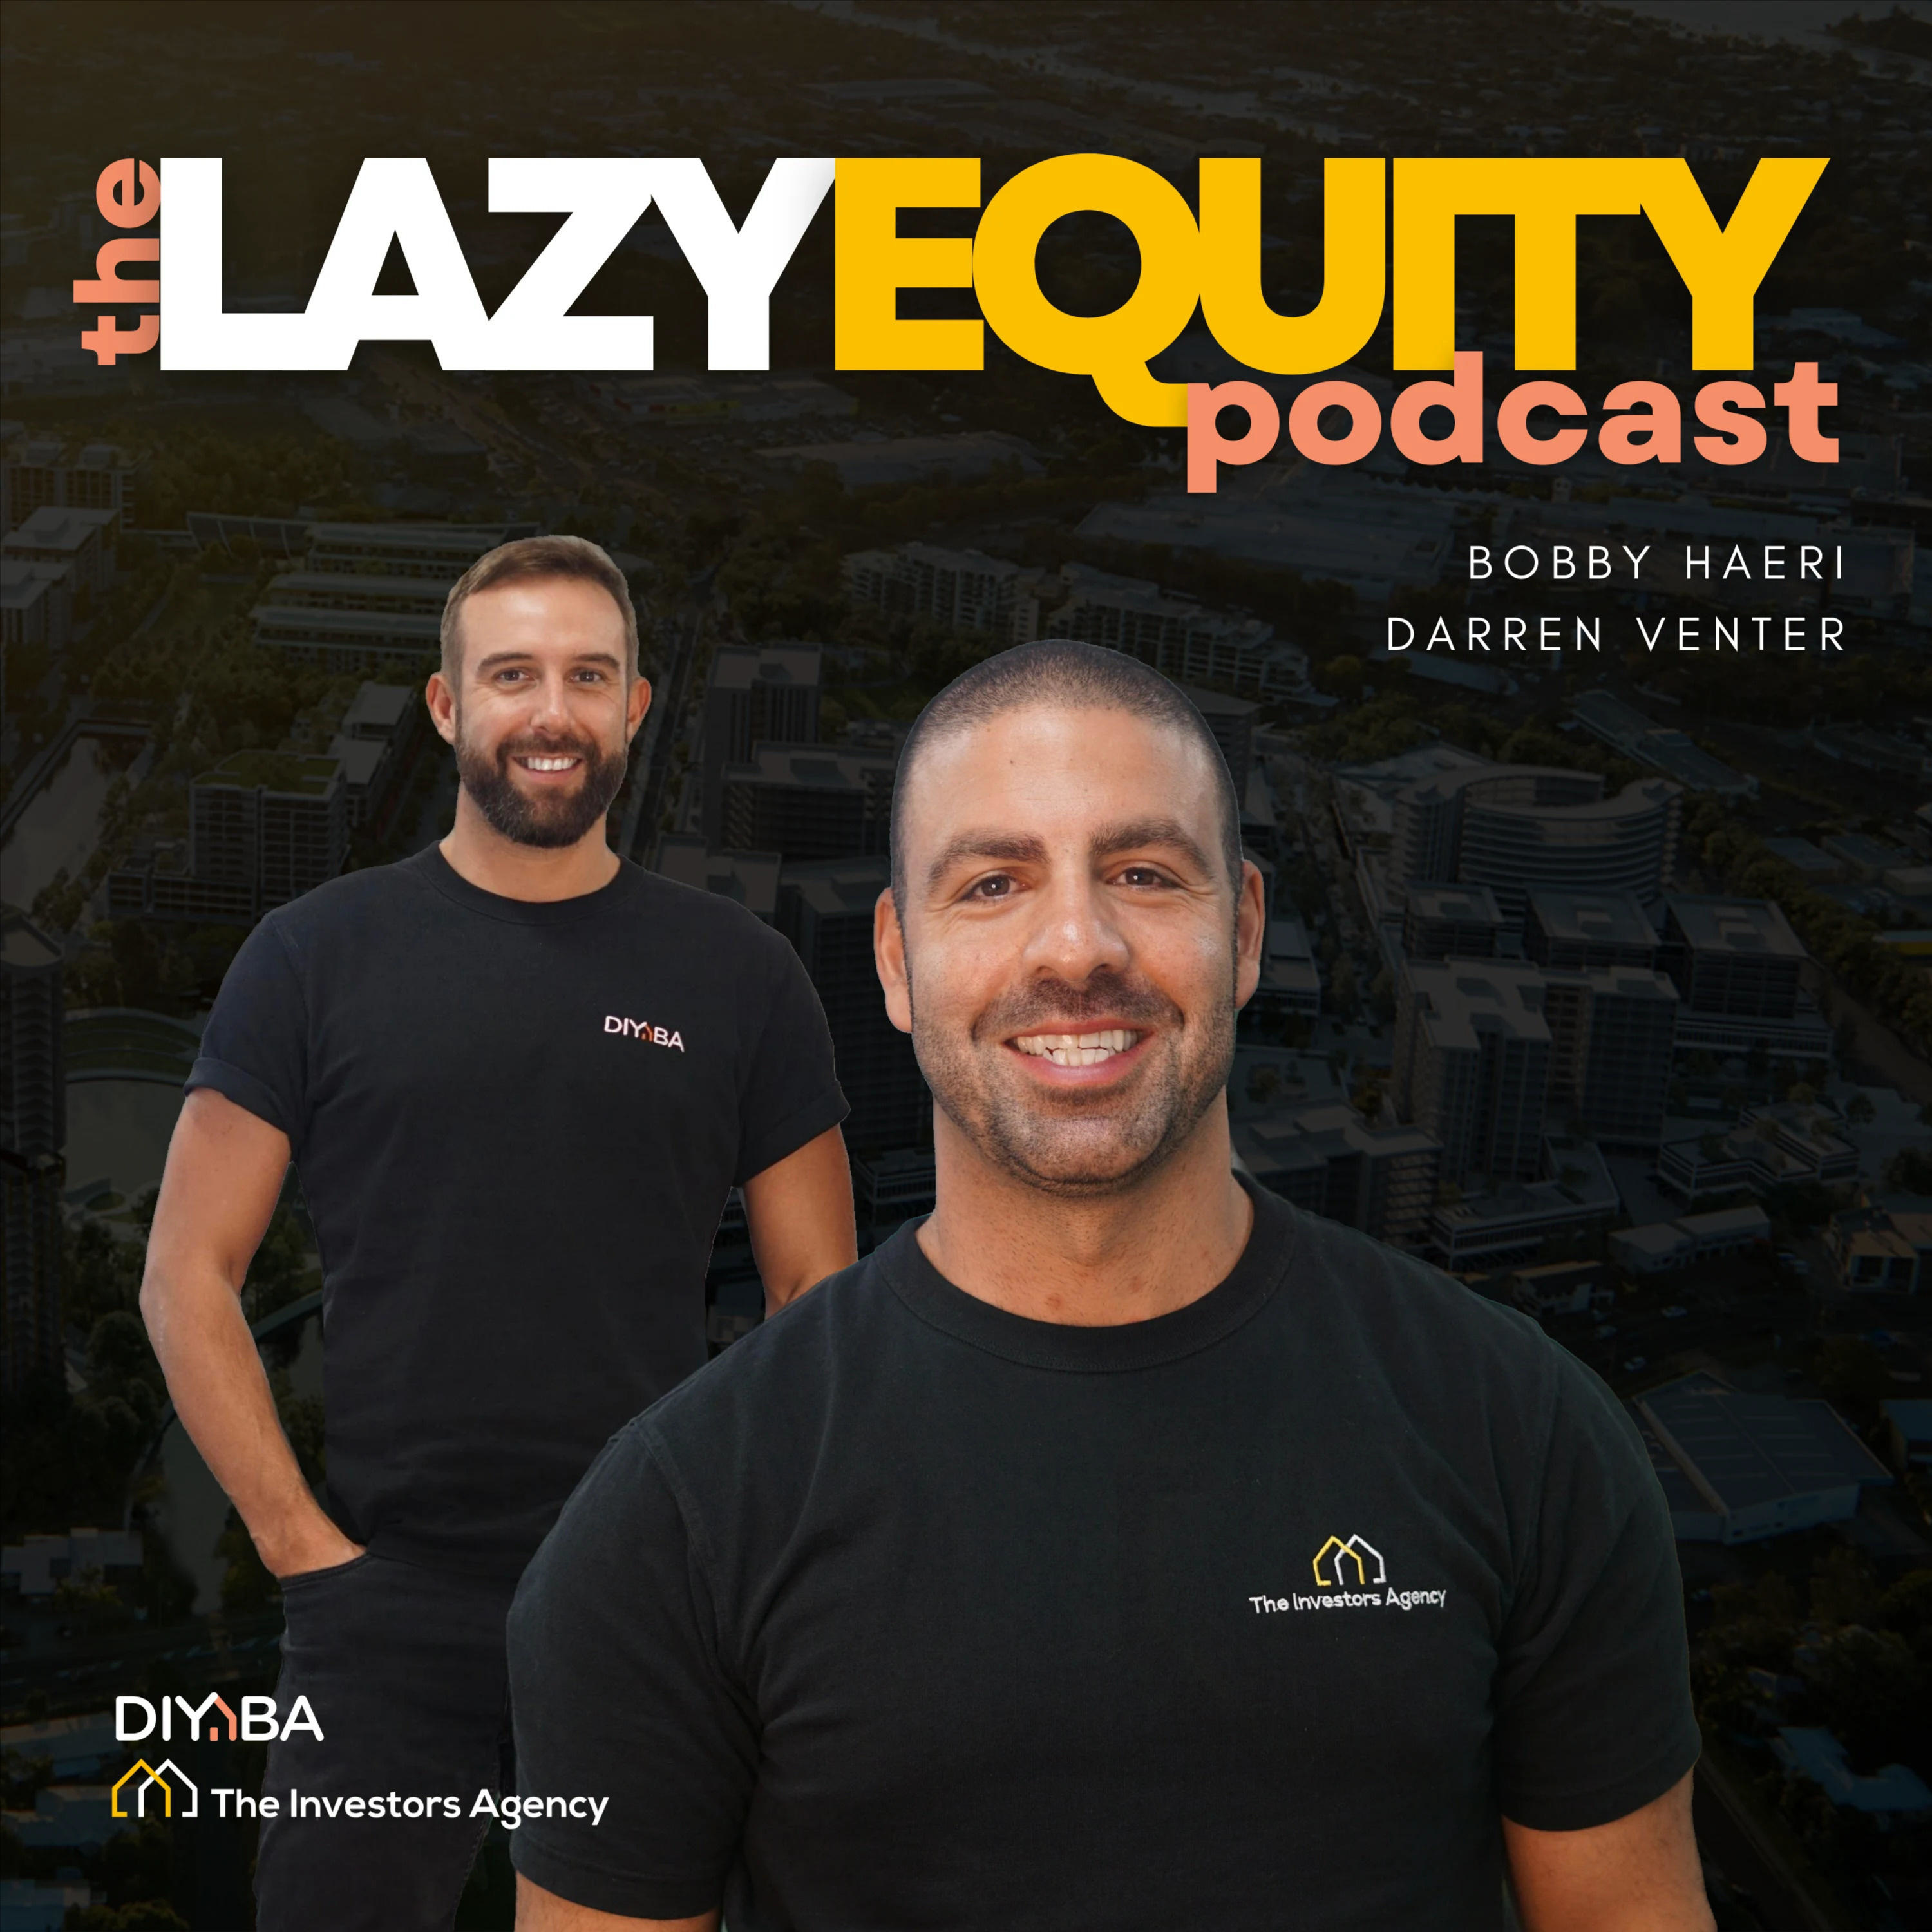 Lazy Equity